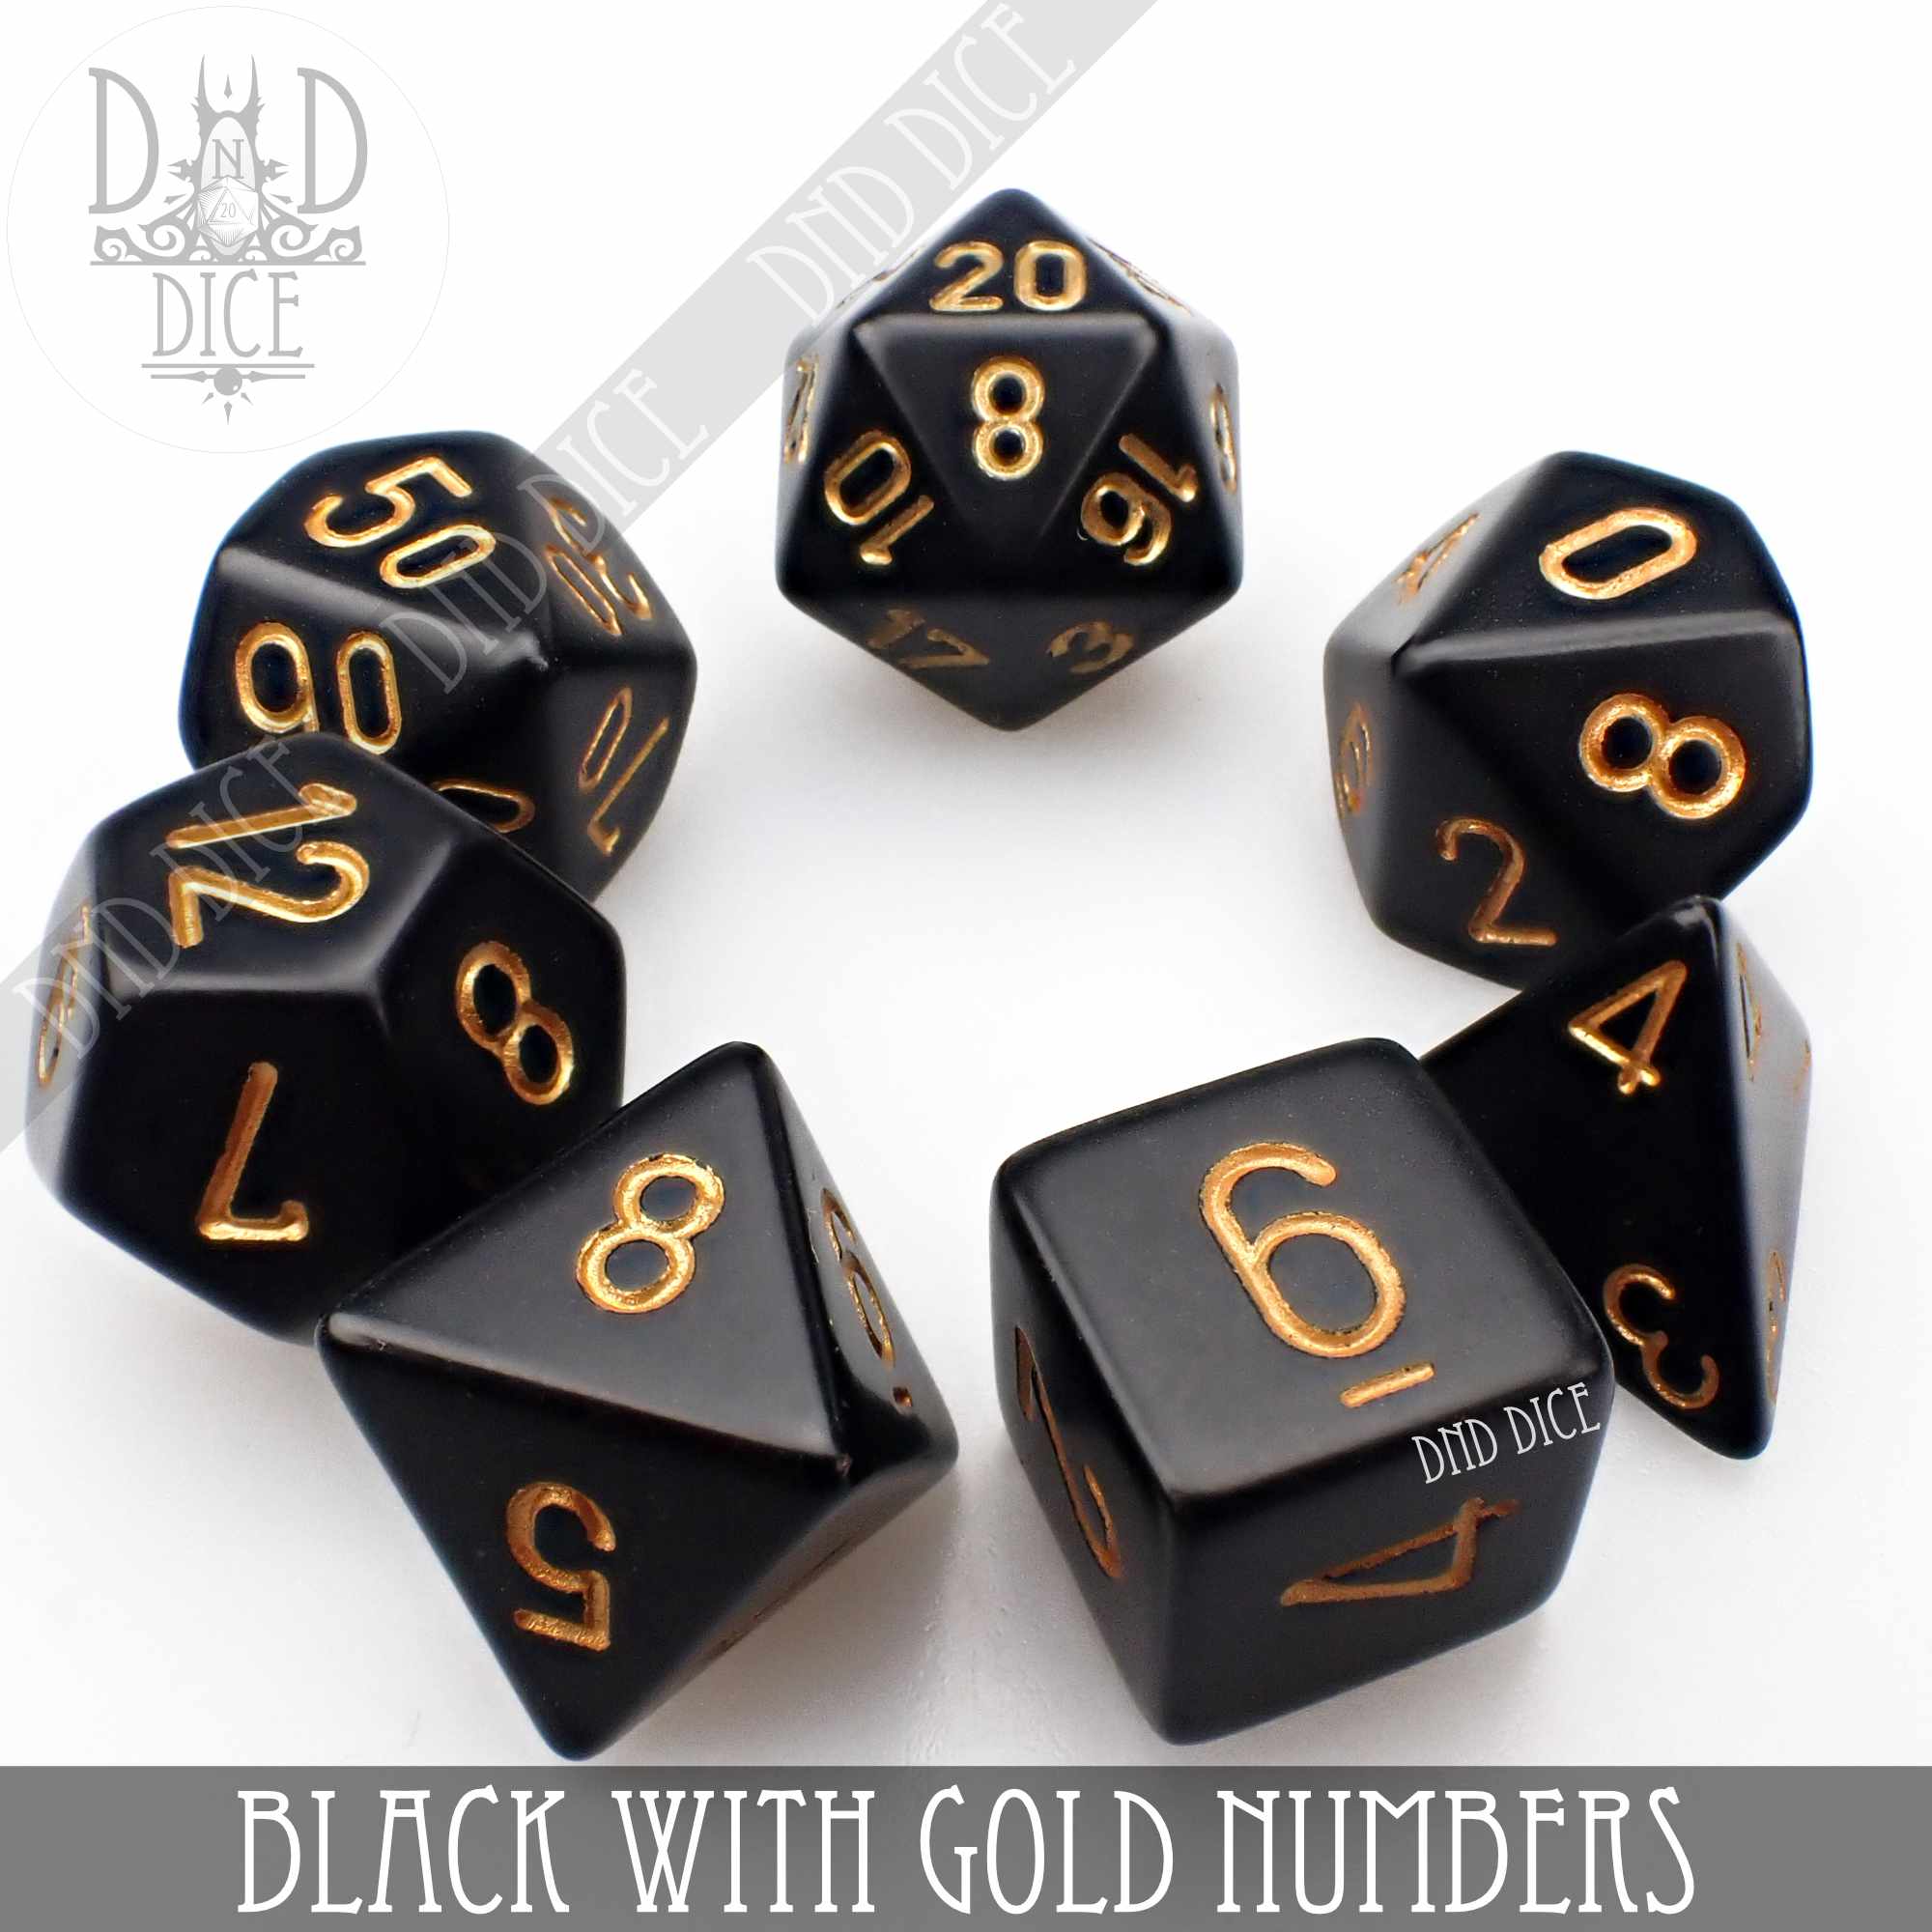 Black with Gold Numbers Build Your Own Set